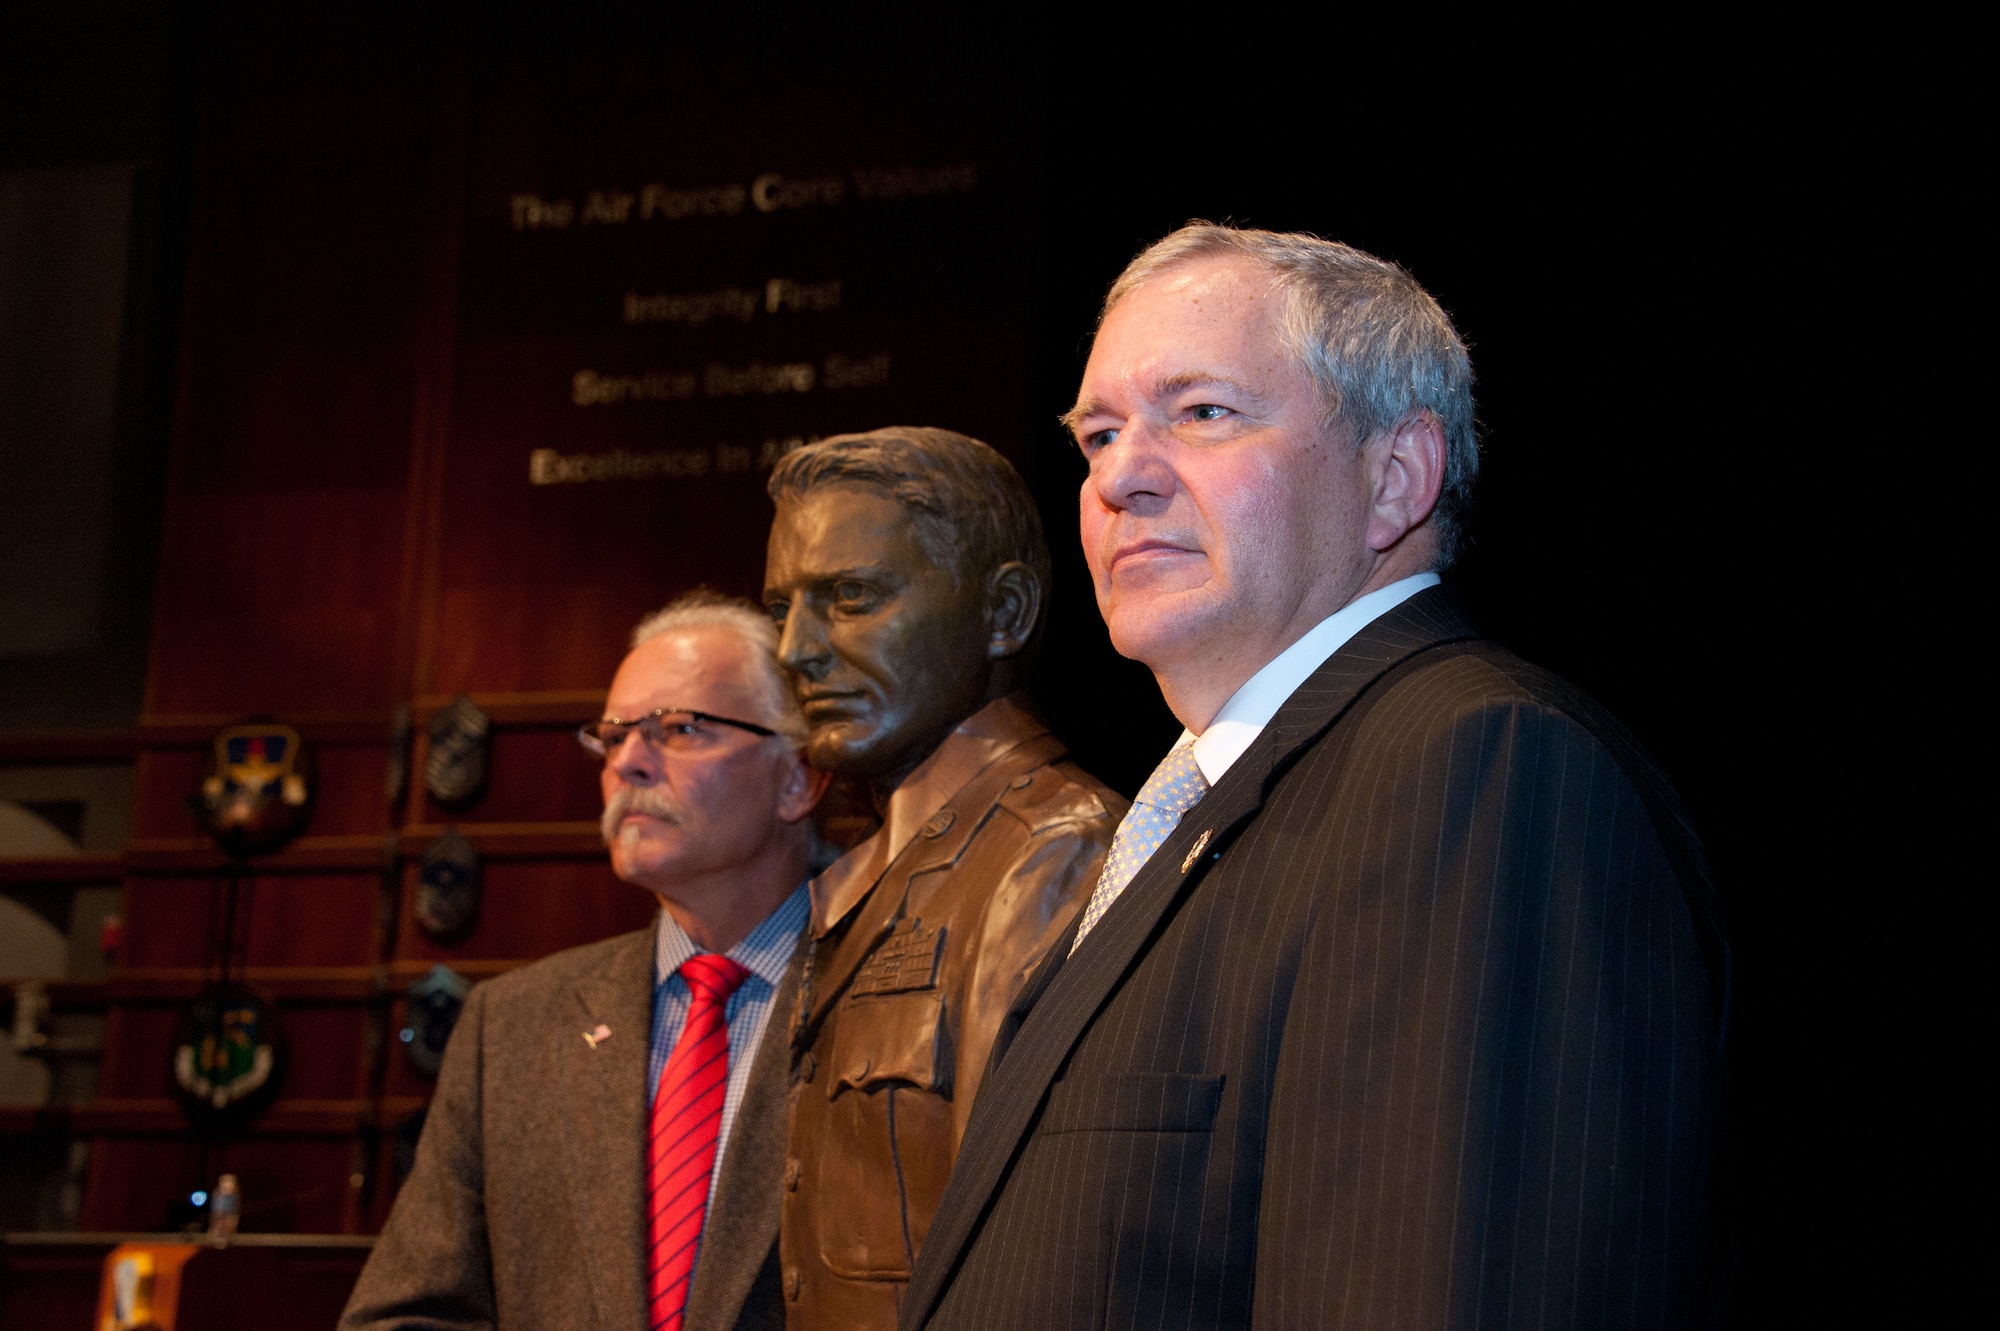 The sons of Chief Master Sergeant Richard L. Etchberger flank the statue of their father following its official unveiling on March 26, 2012.  Rich Etchberger, left, and Cory Etchberger,right, joined other family members and dignitaries including General Philip Breedlove, Vice Chief of Staff of the Air Force, and Chief Master Sergeant James Roy, Chief Master Sergeant of the Air Force, in honoring their father's legacy with the dedication of his medal of honor and the bust unveiling at the Air Force Senior Noncommissioned Officer Academy. (U.S. Air Force photo by Melanie Rodgers Cox)